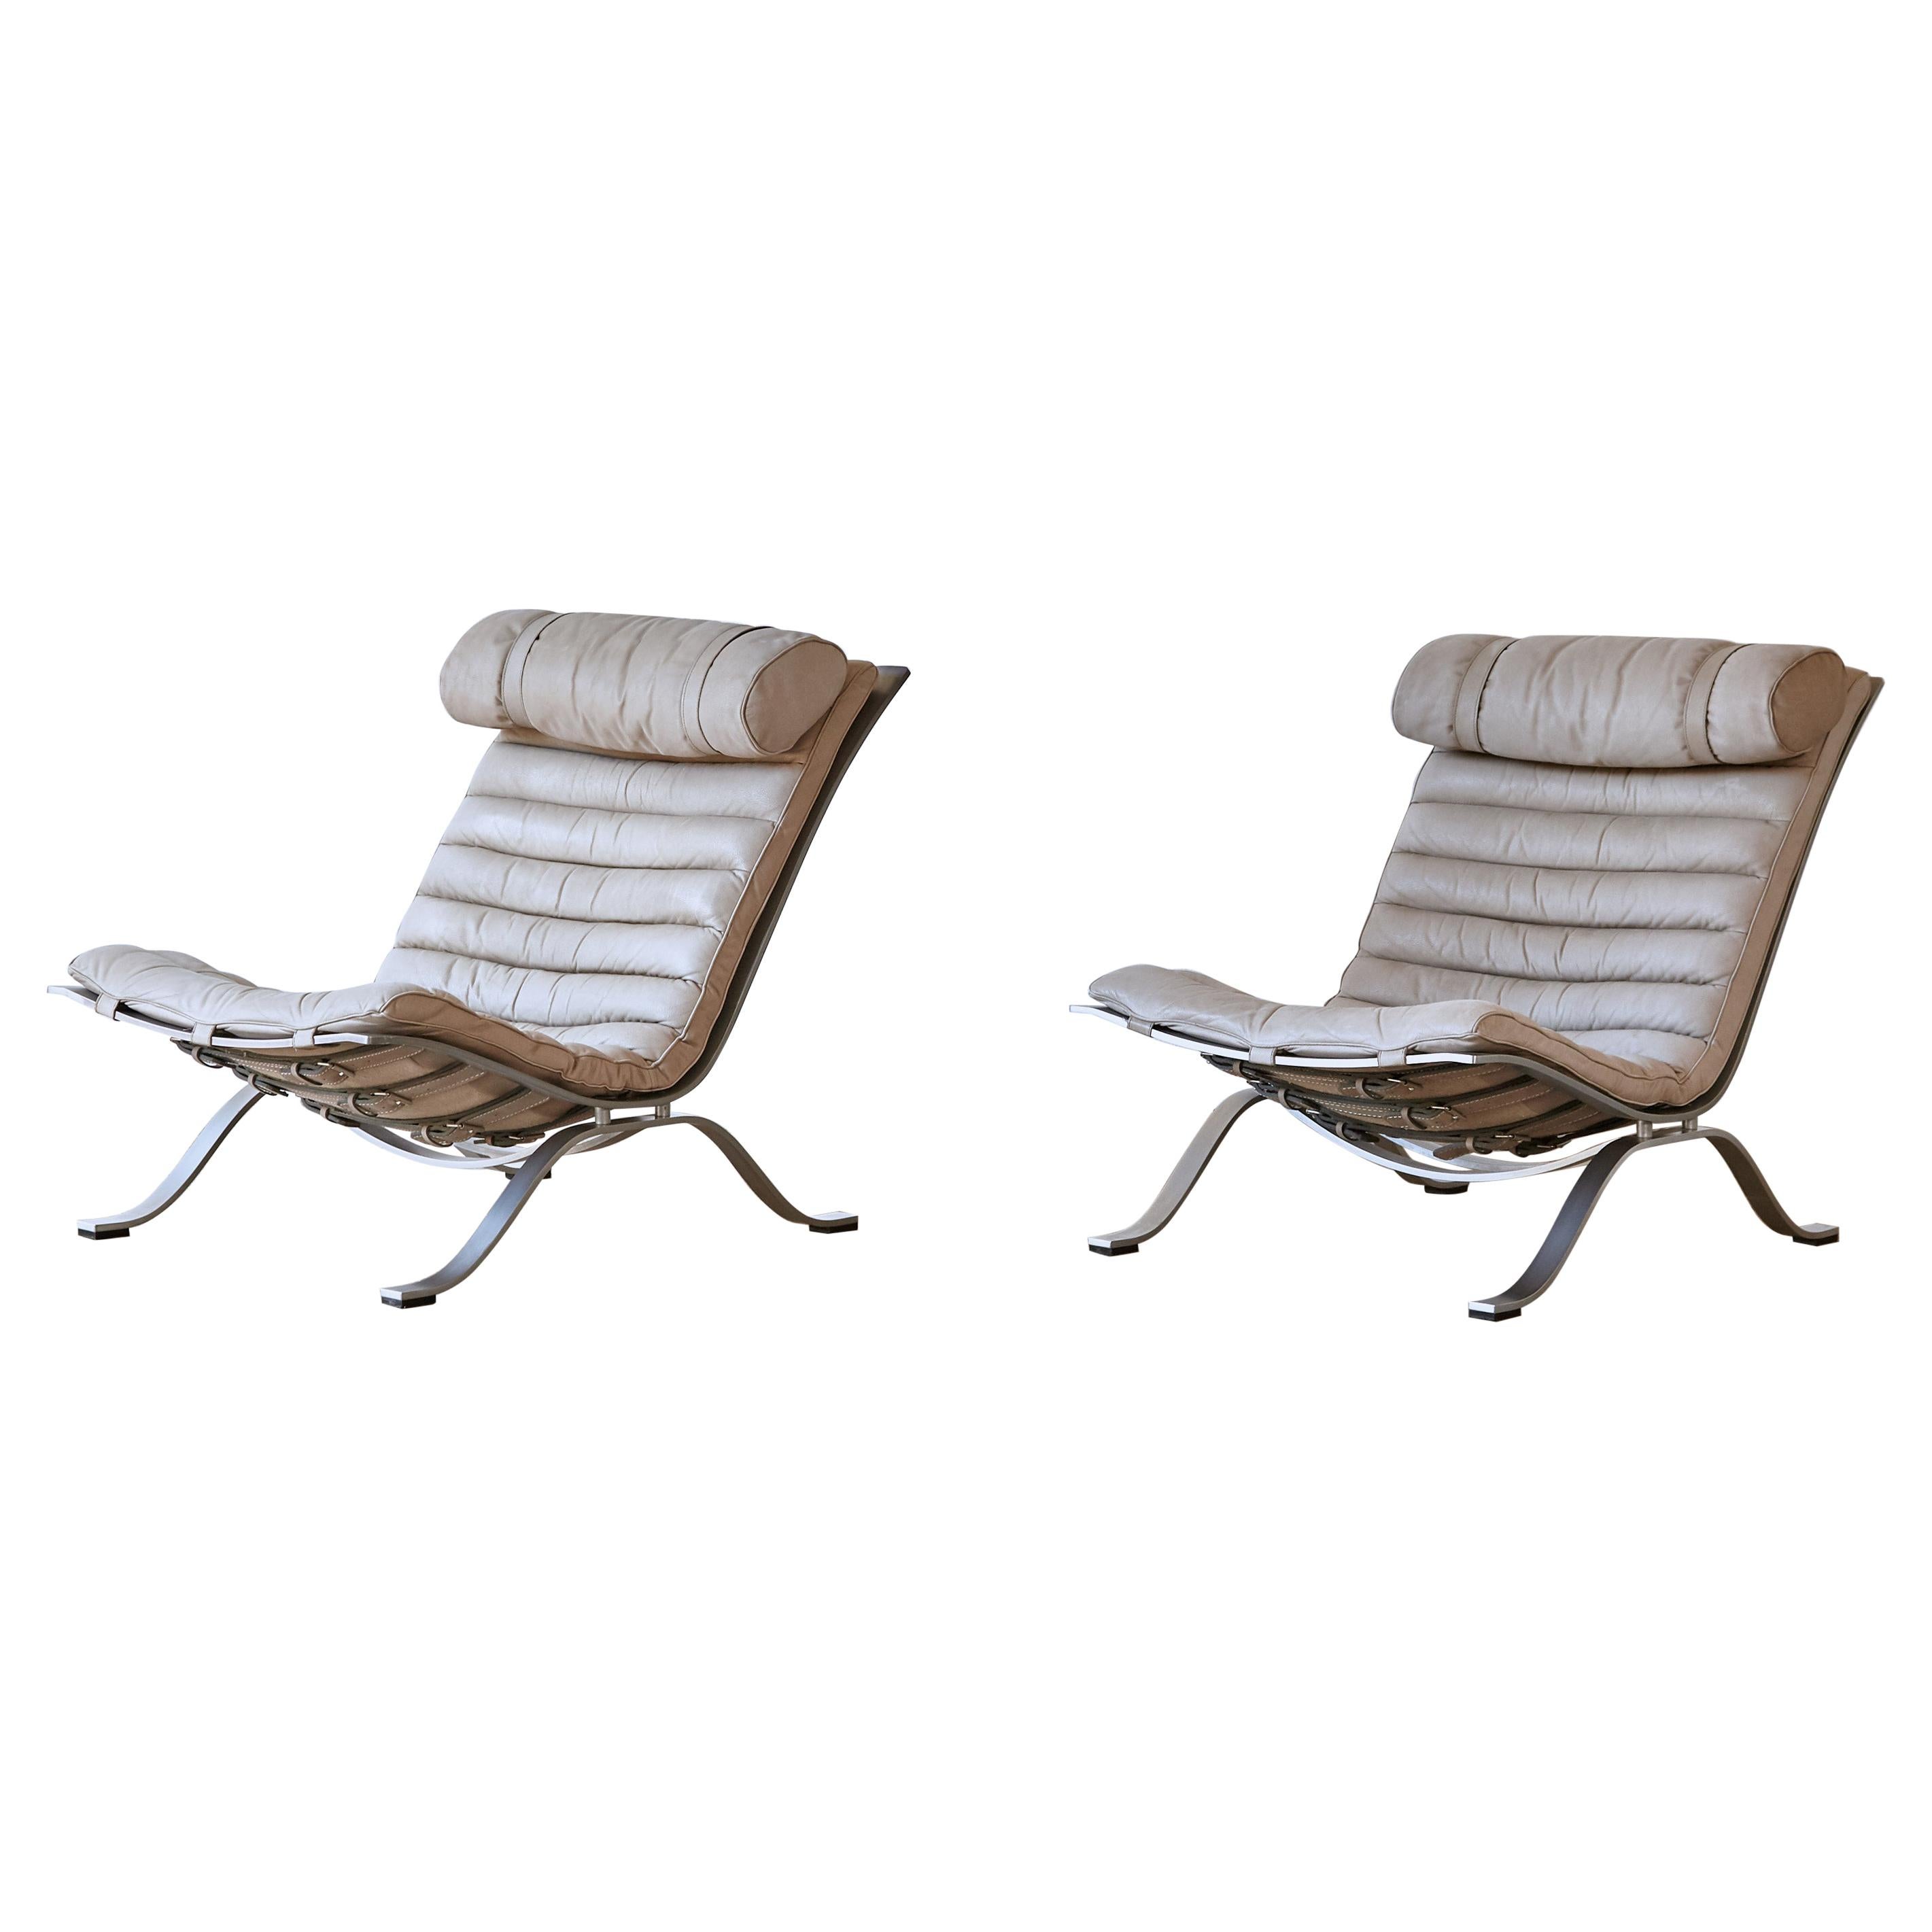 Pair of Arne Norell Leather Ari Chairs, Sweden